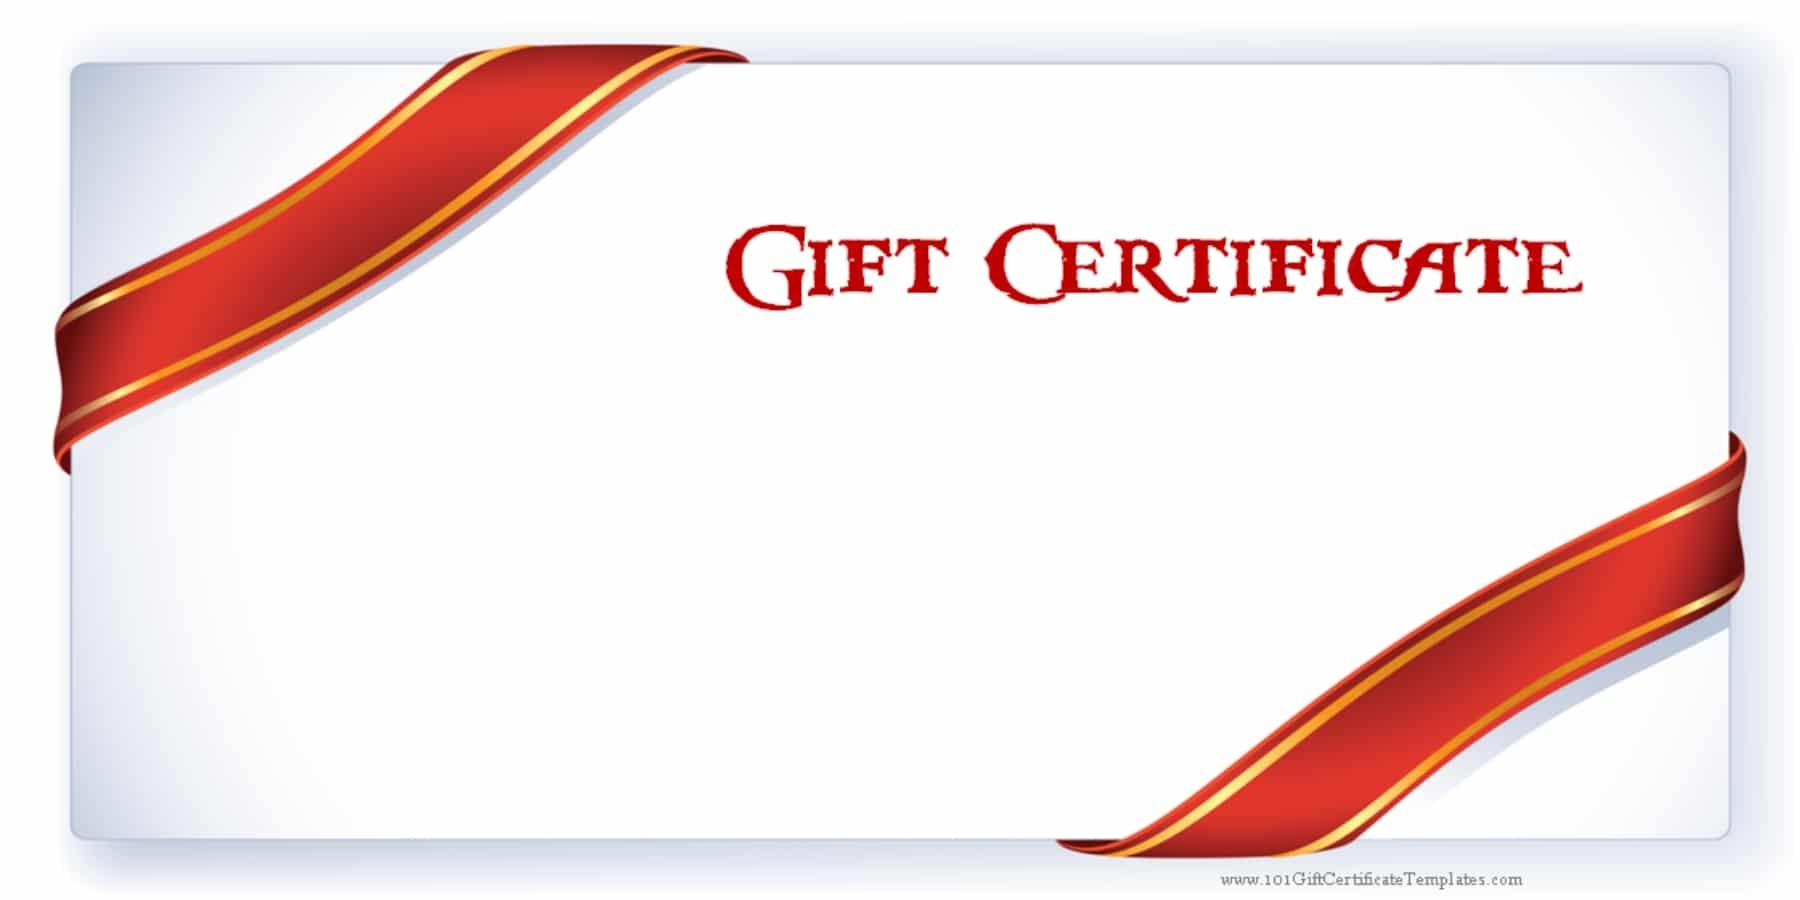 Printable Gift Certificate Templates - Free Printable Gift Cards